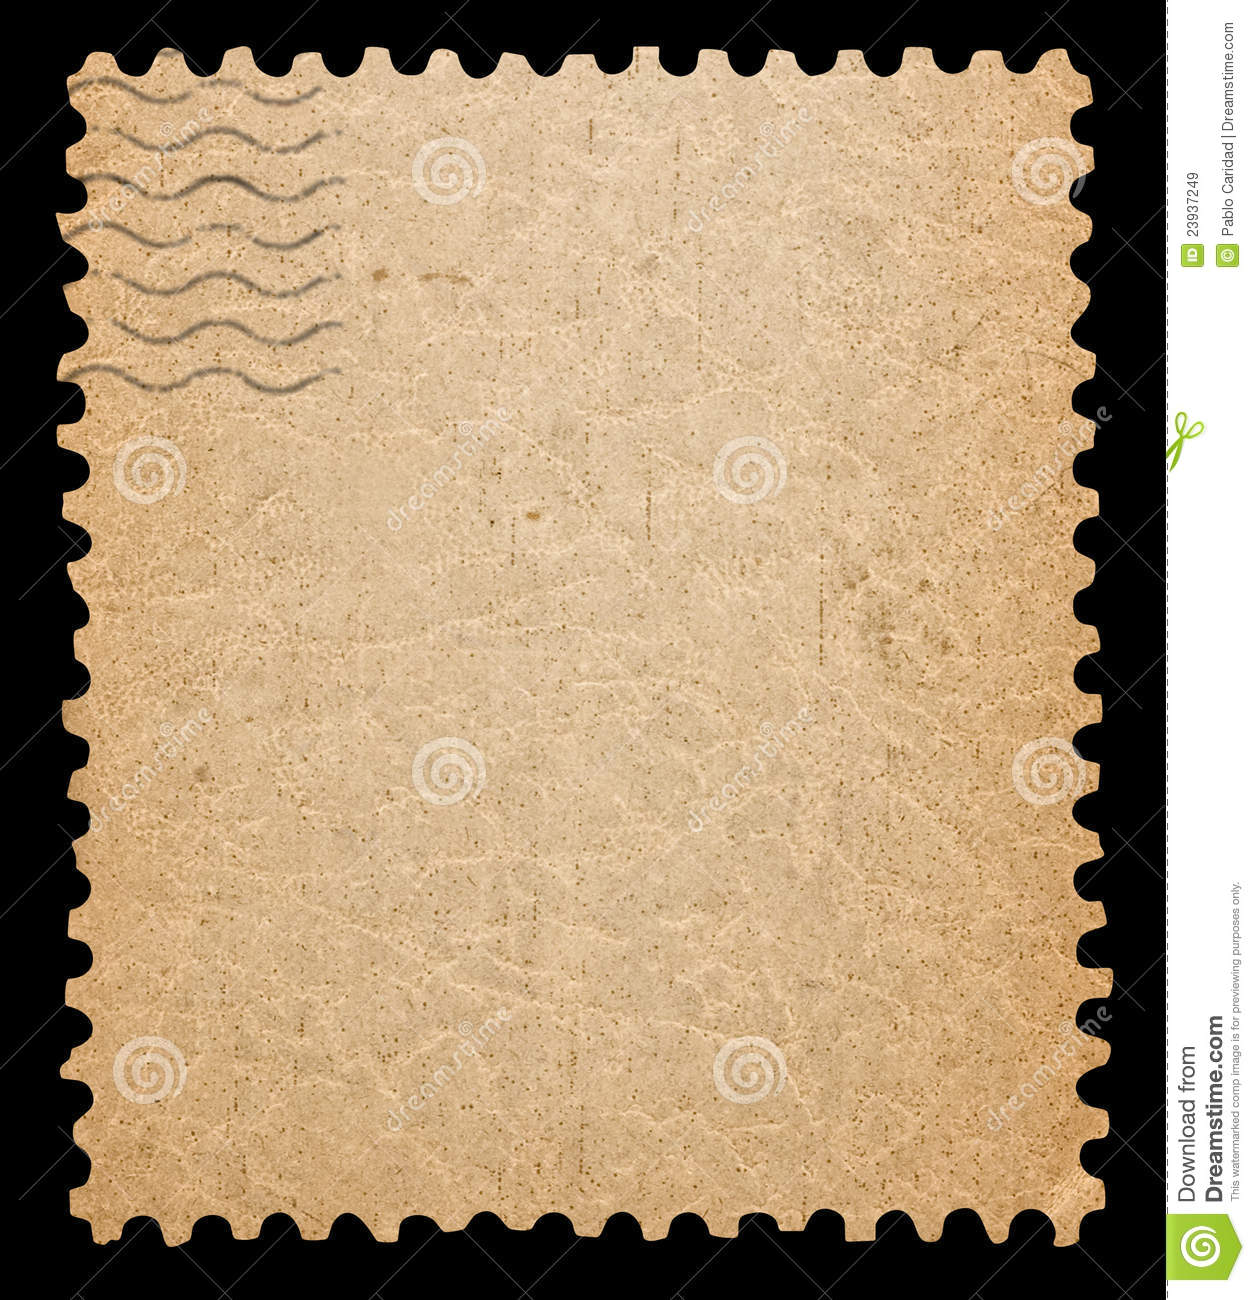 Blank Postage Stamp  Royalty Free Stock Images   Image  23937249